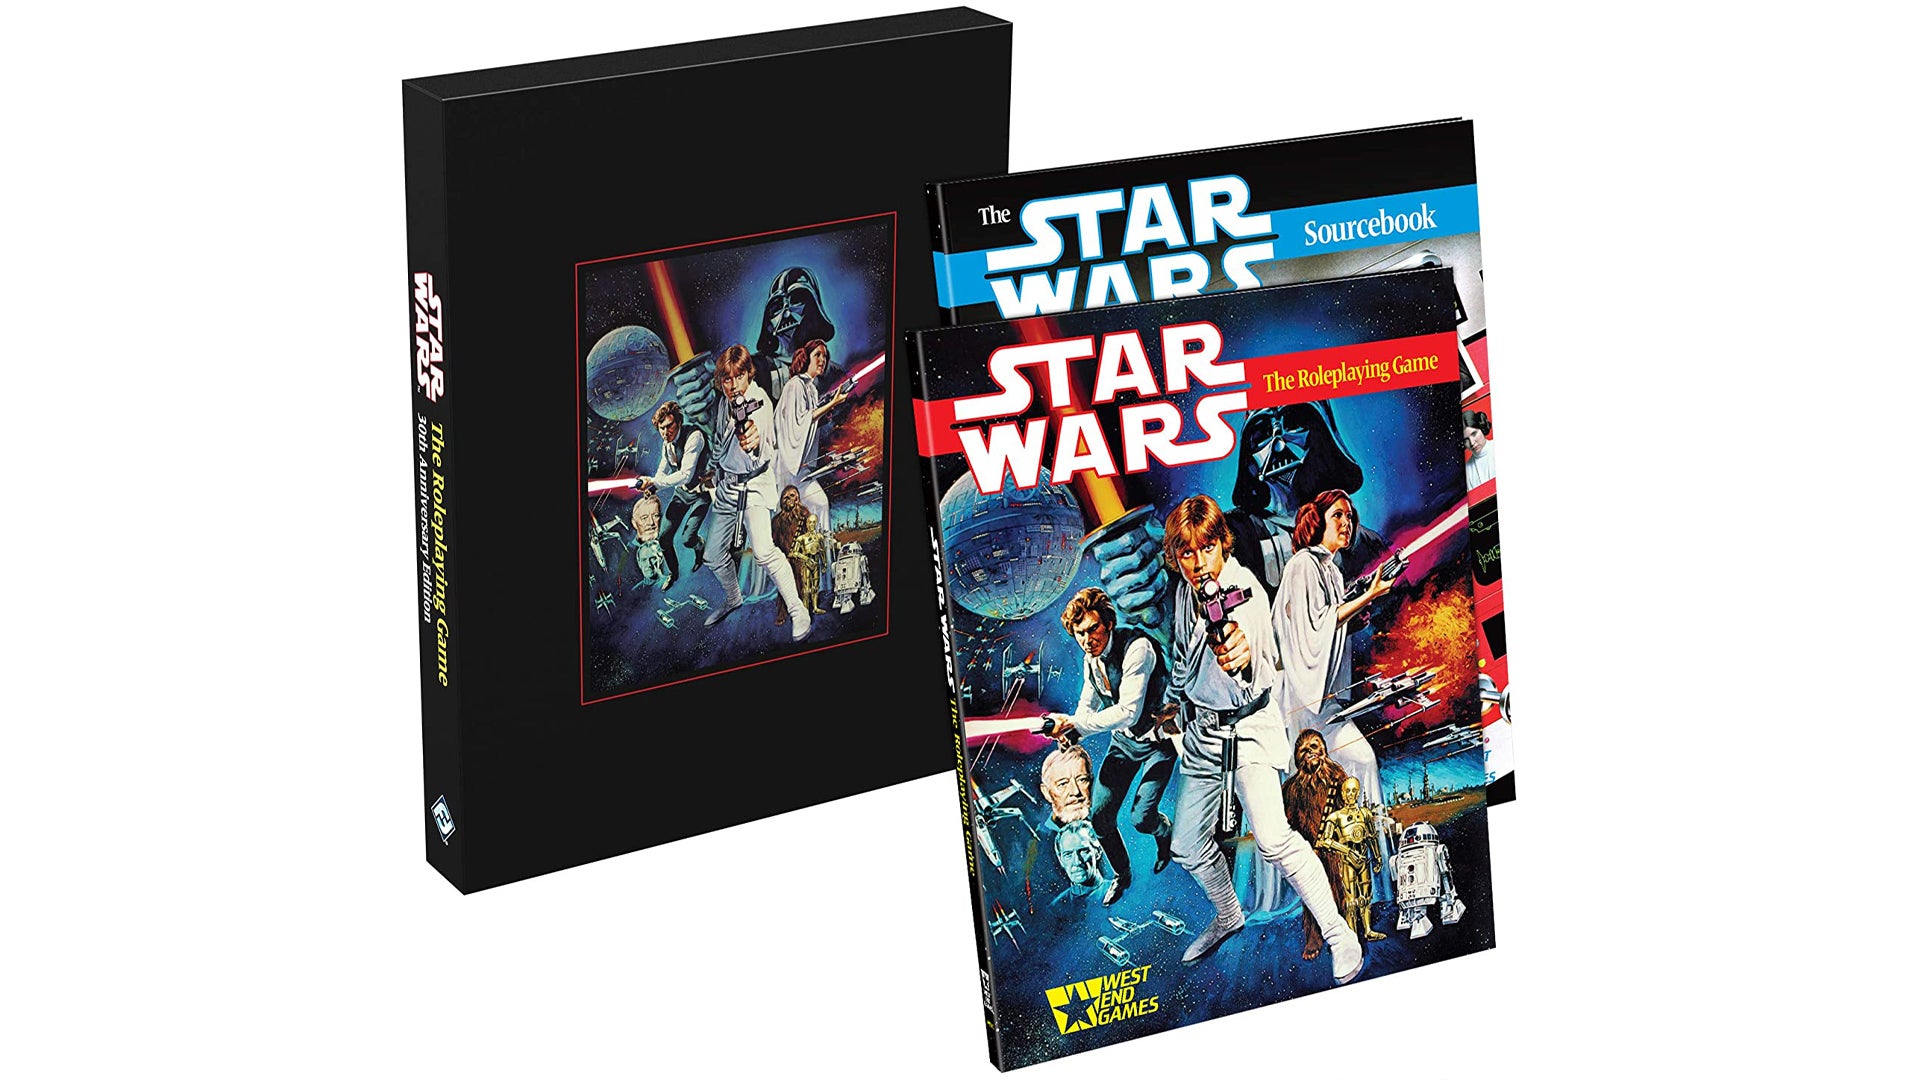 Image for Star Wars: The RPG’s 30th anniversary edition is almost half price right now